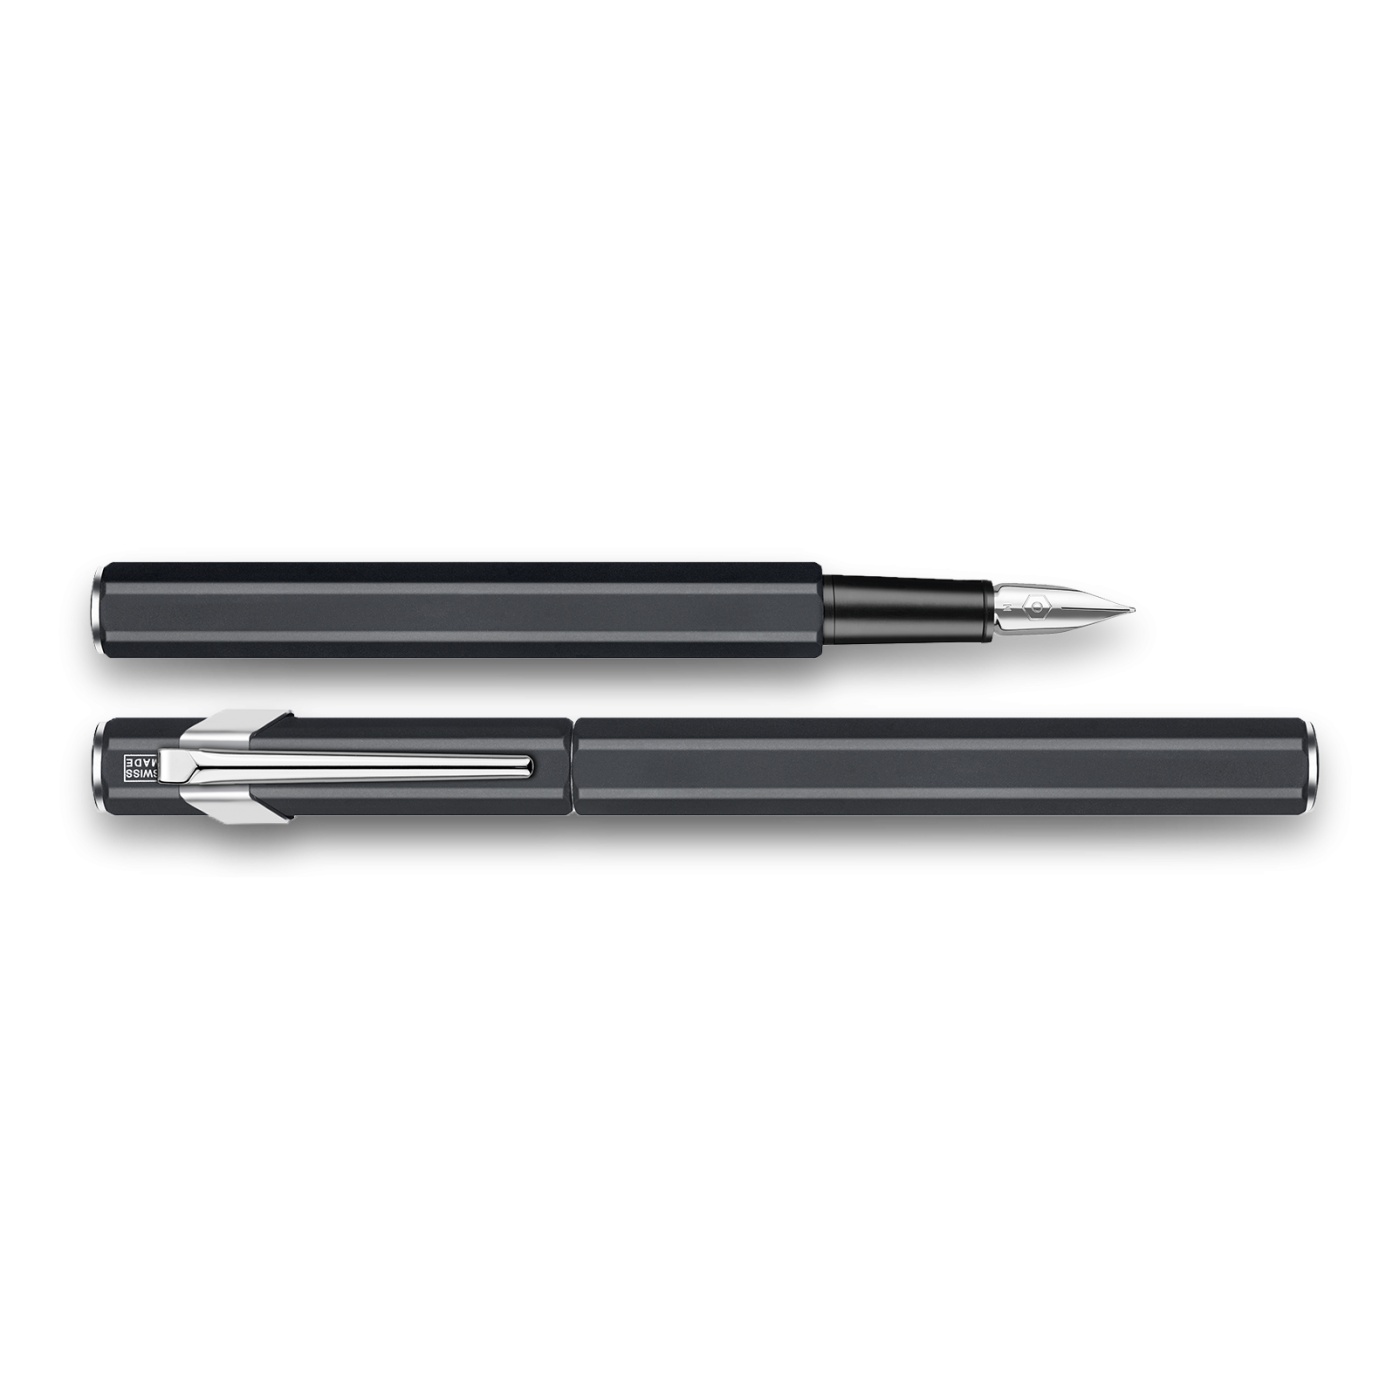 849 Fountain pen Black in the group Pens / Fine Writing / Gift Pens at Pen Store (100534_r)